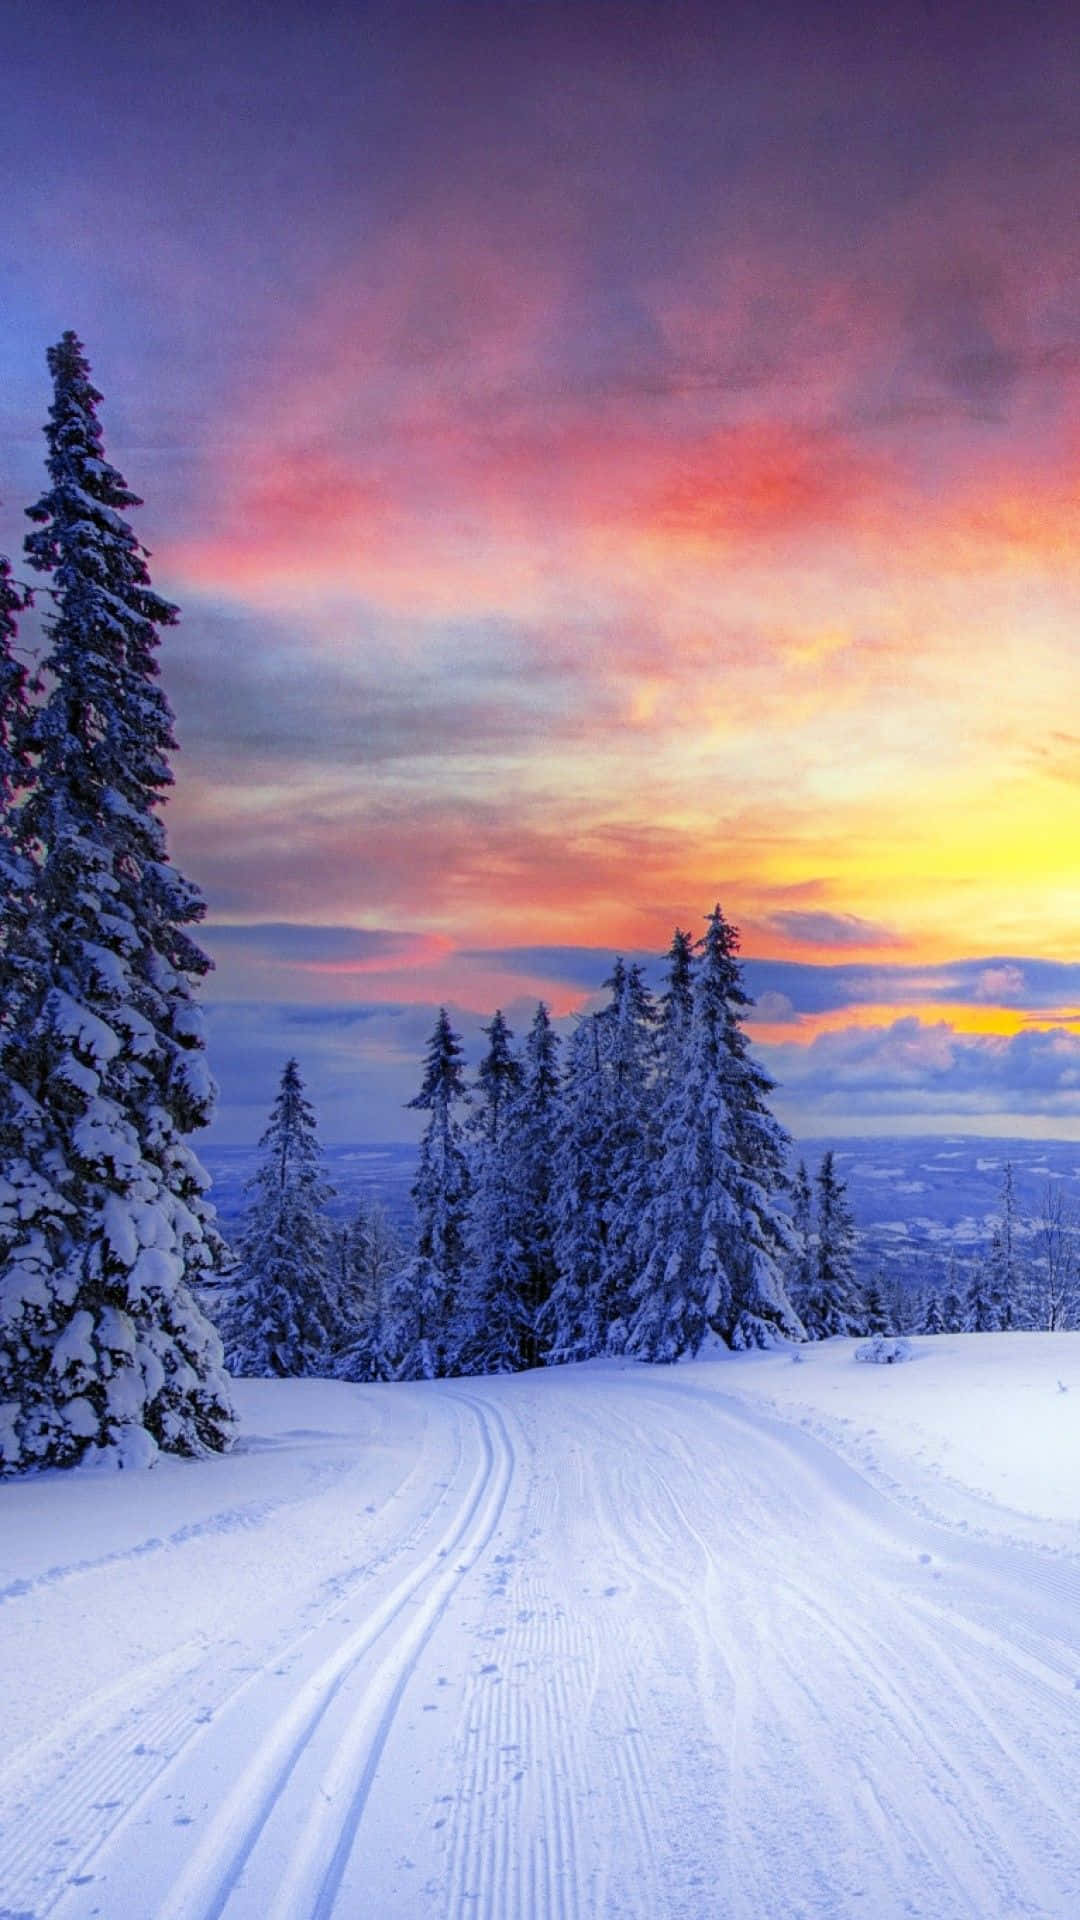 Enjoy Winter With a Brand New Iphone 6 Plus Wallpaper